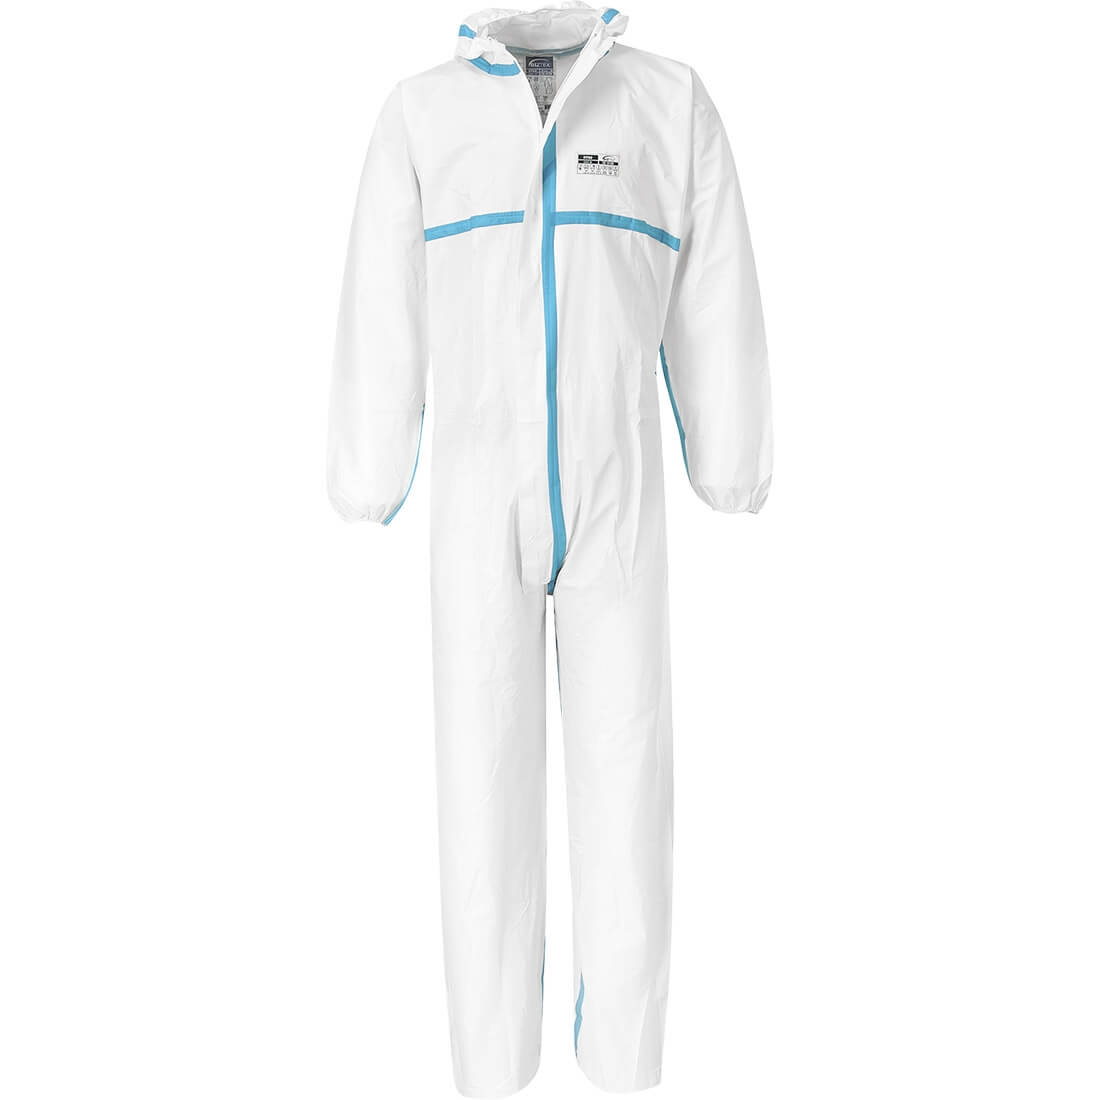 BizTex® Microporous 4/5/6 Coverall - Personal protection